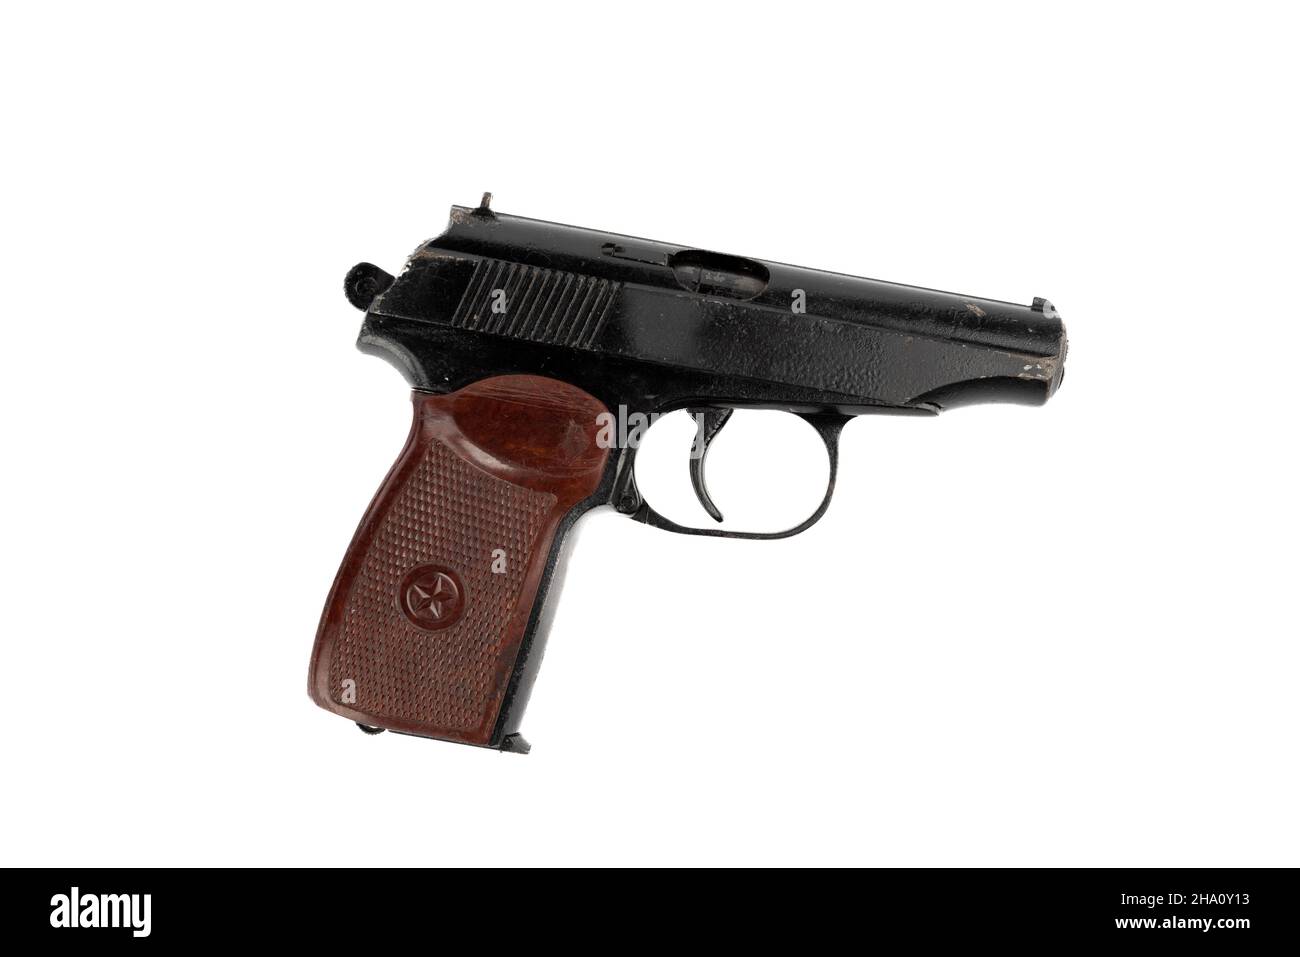 Used makarov pistol isolated on white background. The main weapon of the Soviet militia and the Russian police. Stock Photo